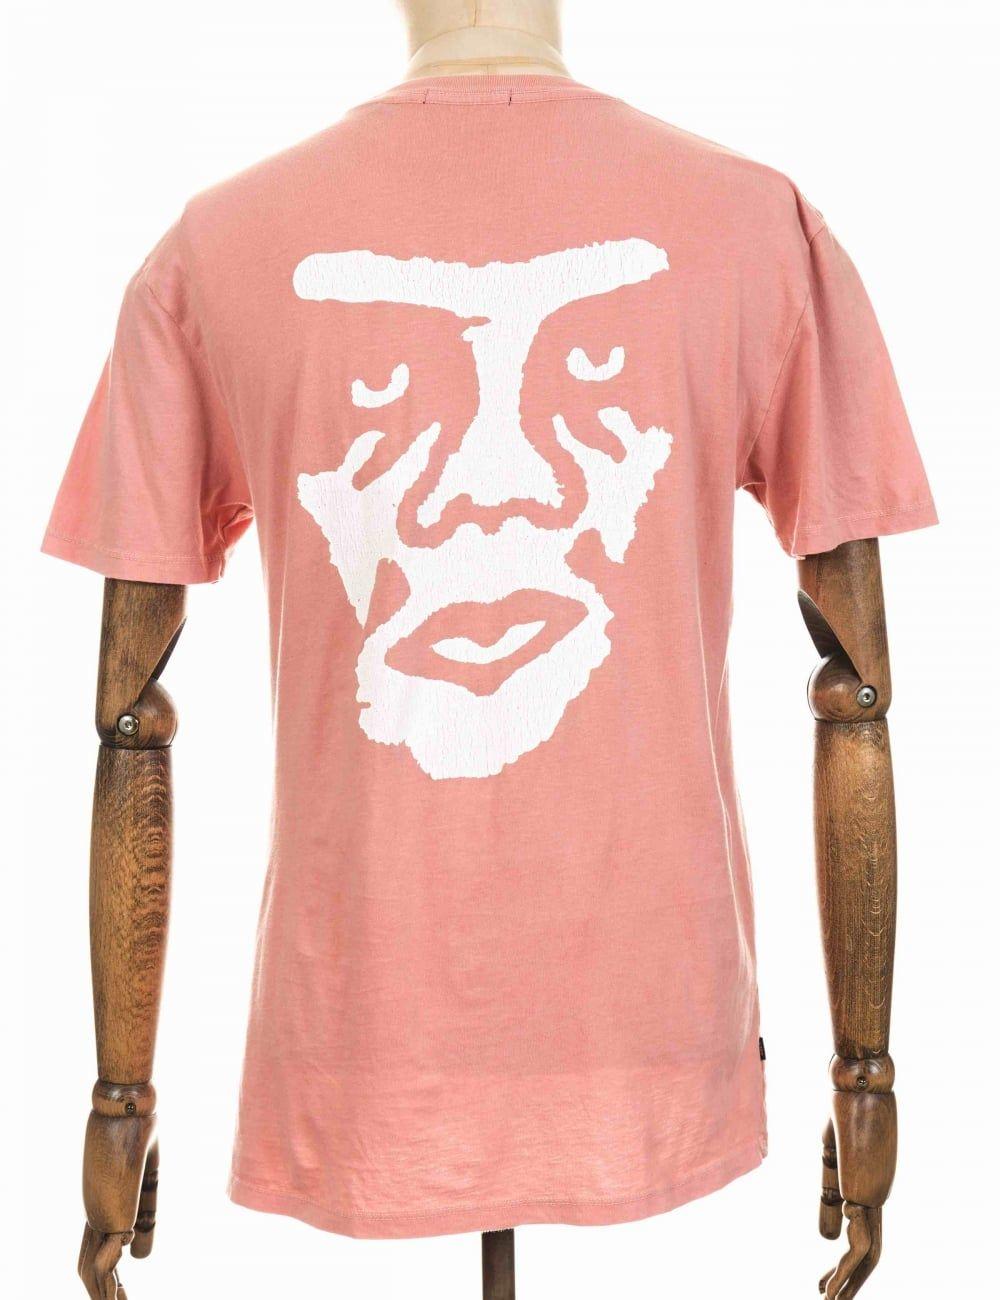 OBEY Clothing Rose Logo - Obey Clothing The Creeper Tee from Fat Buddha Store UK